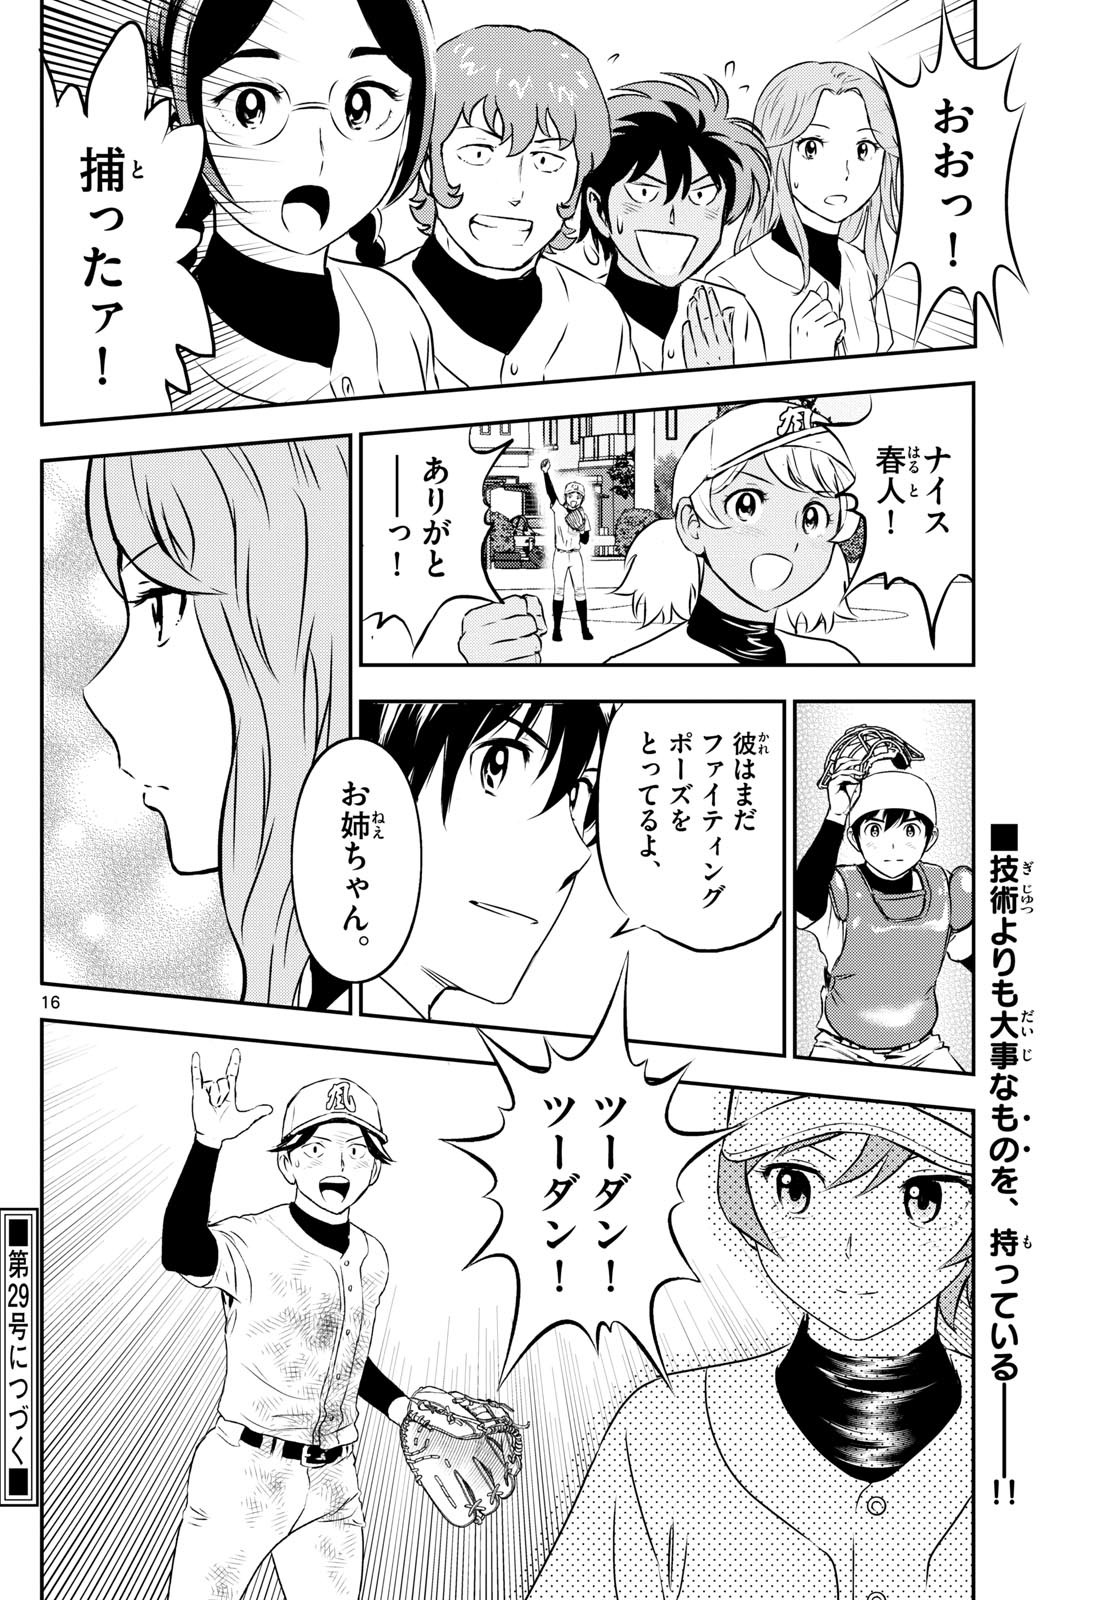 Major 2nd - メジャーセカンド - Chapter 256 - Page 16